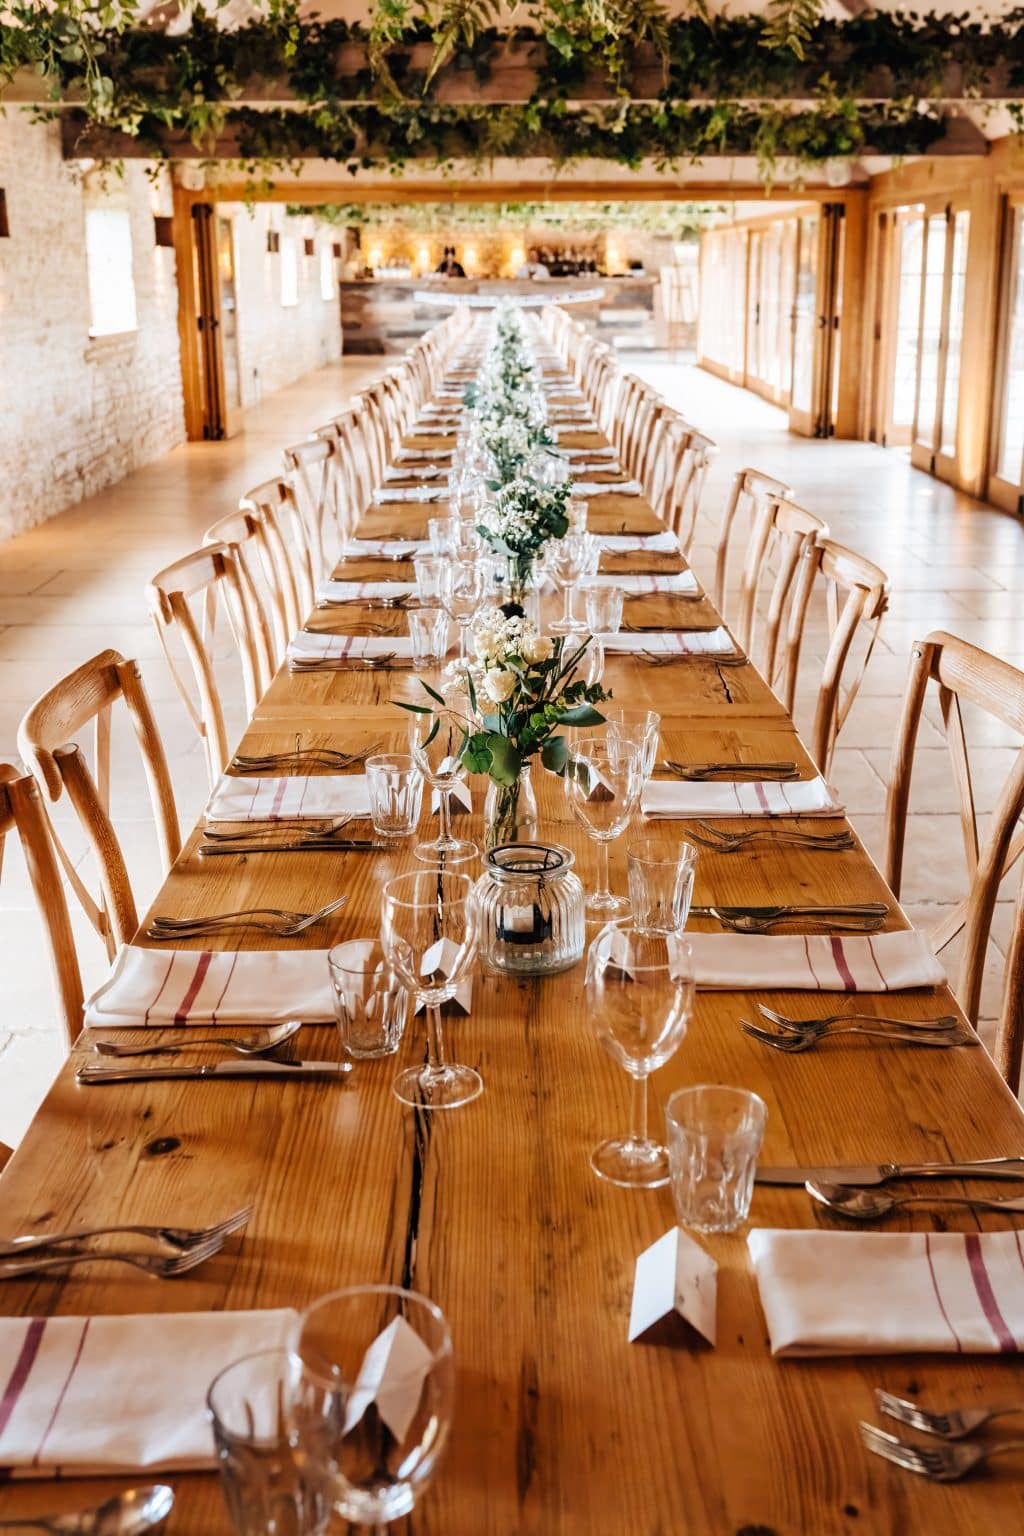 Mediterranean vibes at dining with long tables full of flowers and vines at Old Gore Barn by Yard Space, Cirencester